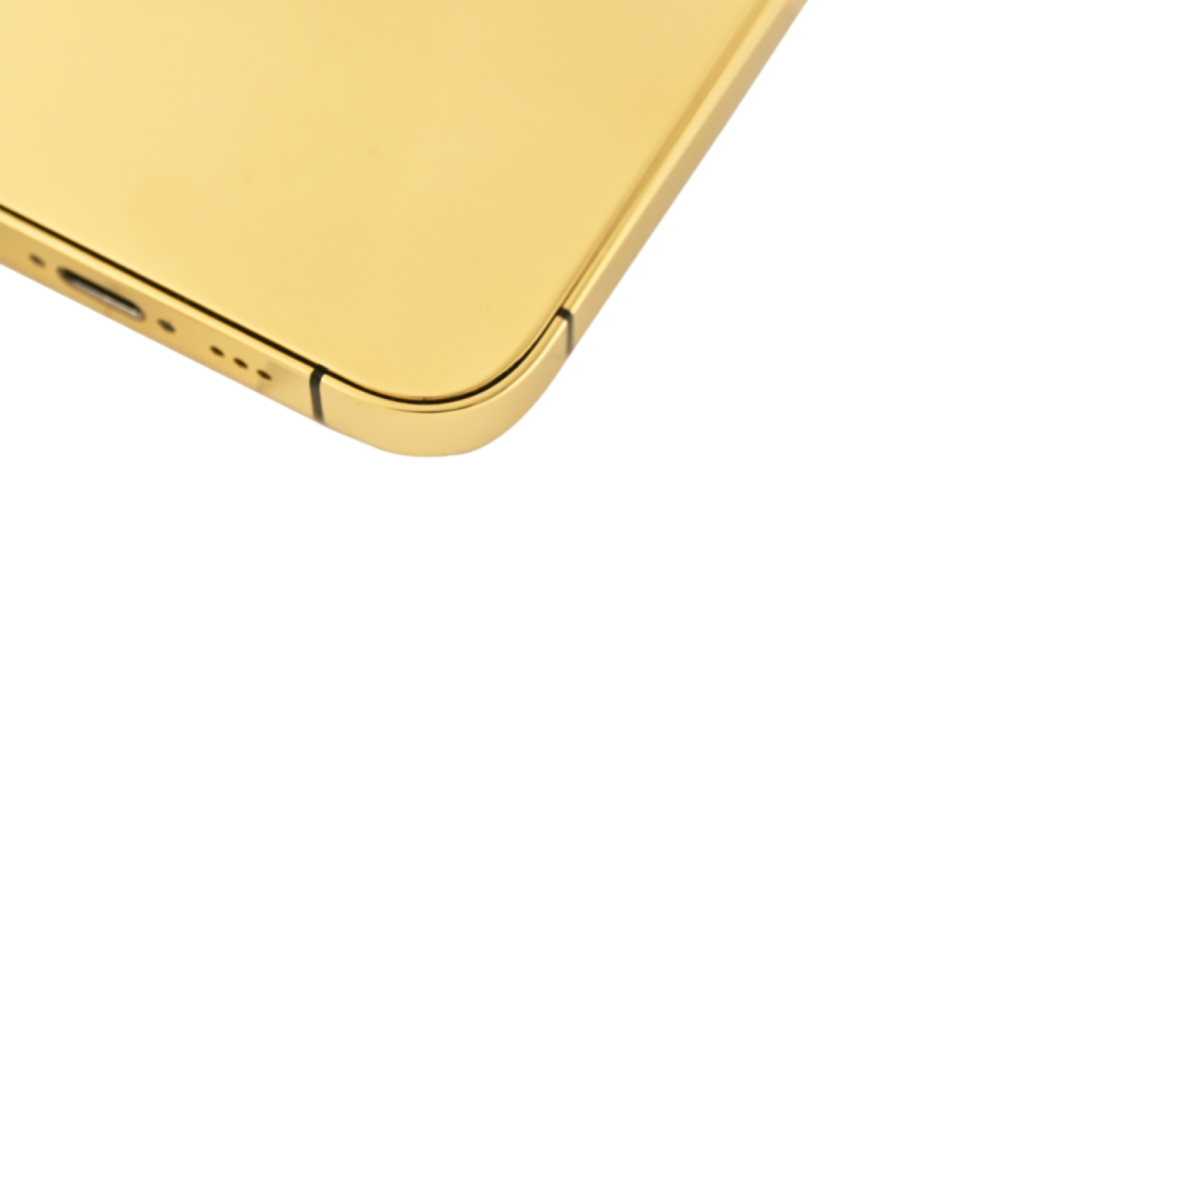 Caviar Luxury 24k Full Gold Customized iPhone 13 Pro 256 GB Limited Edition